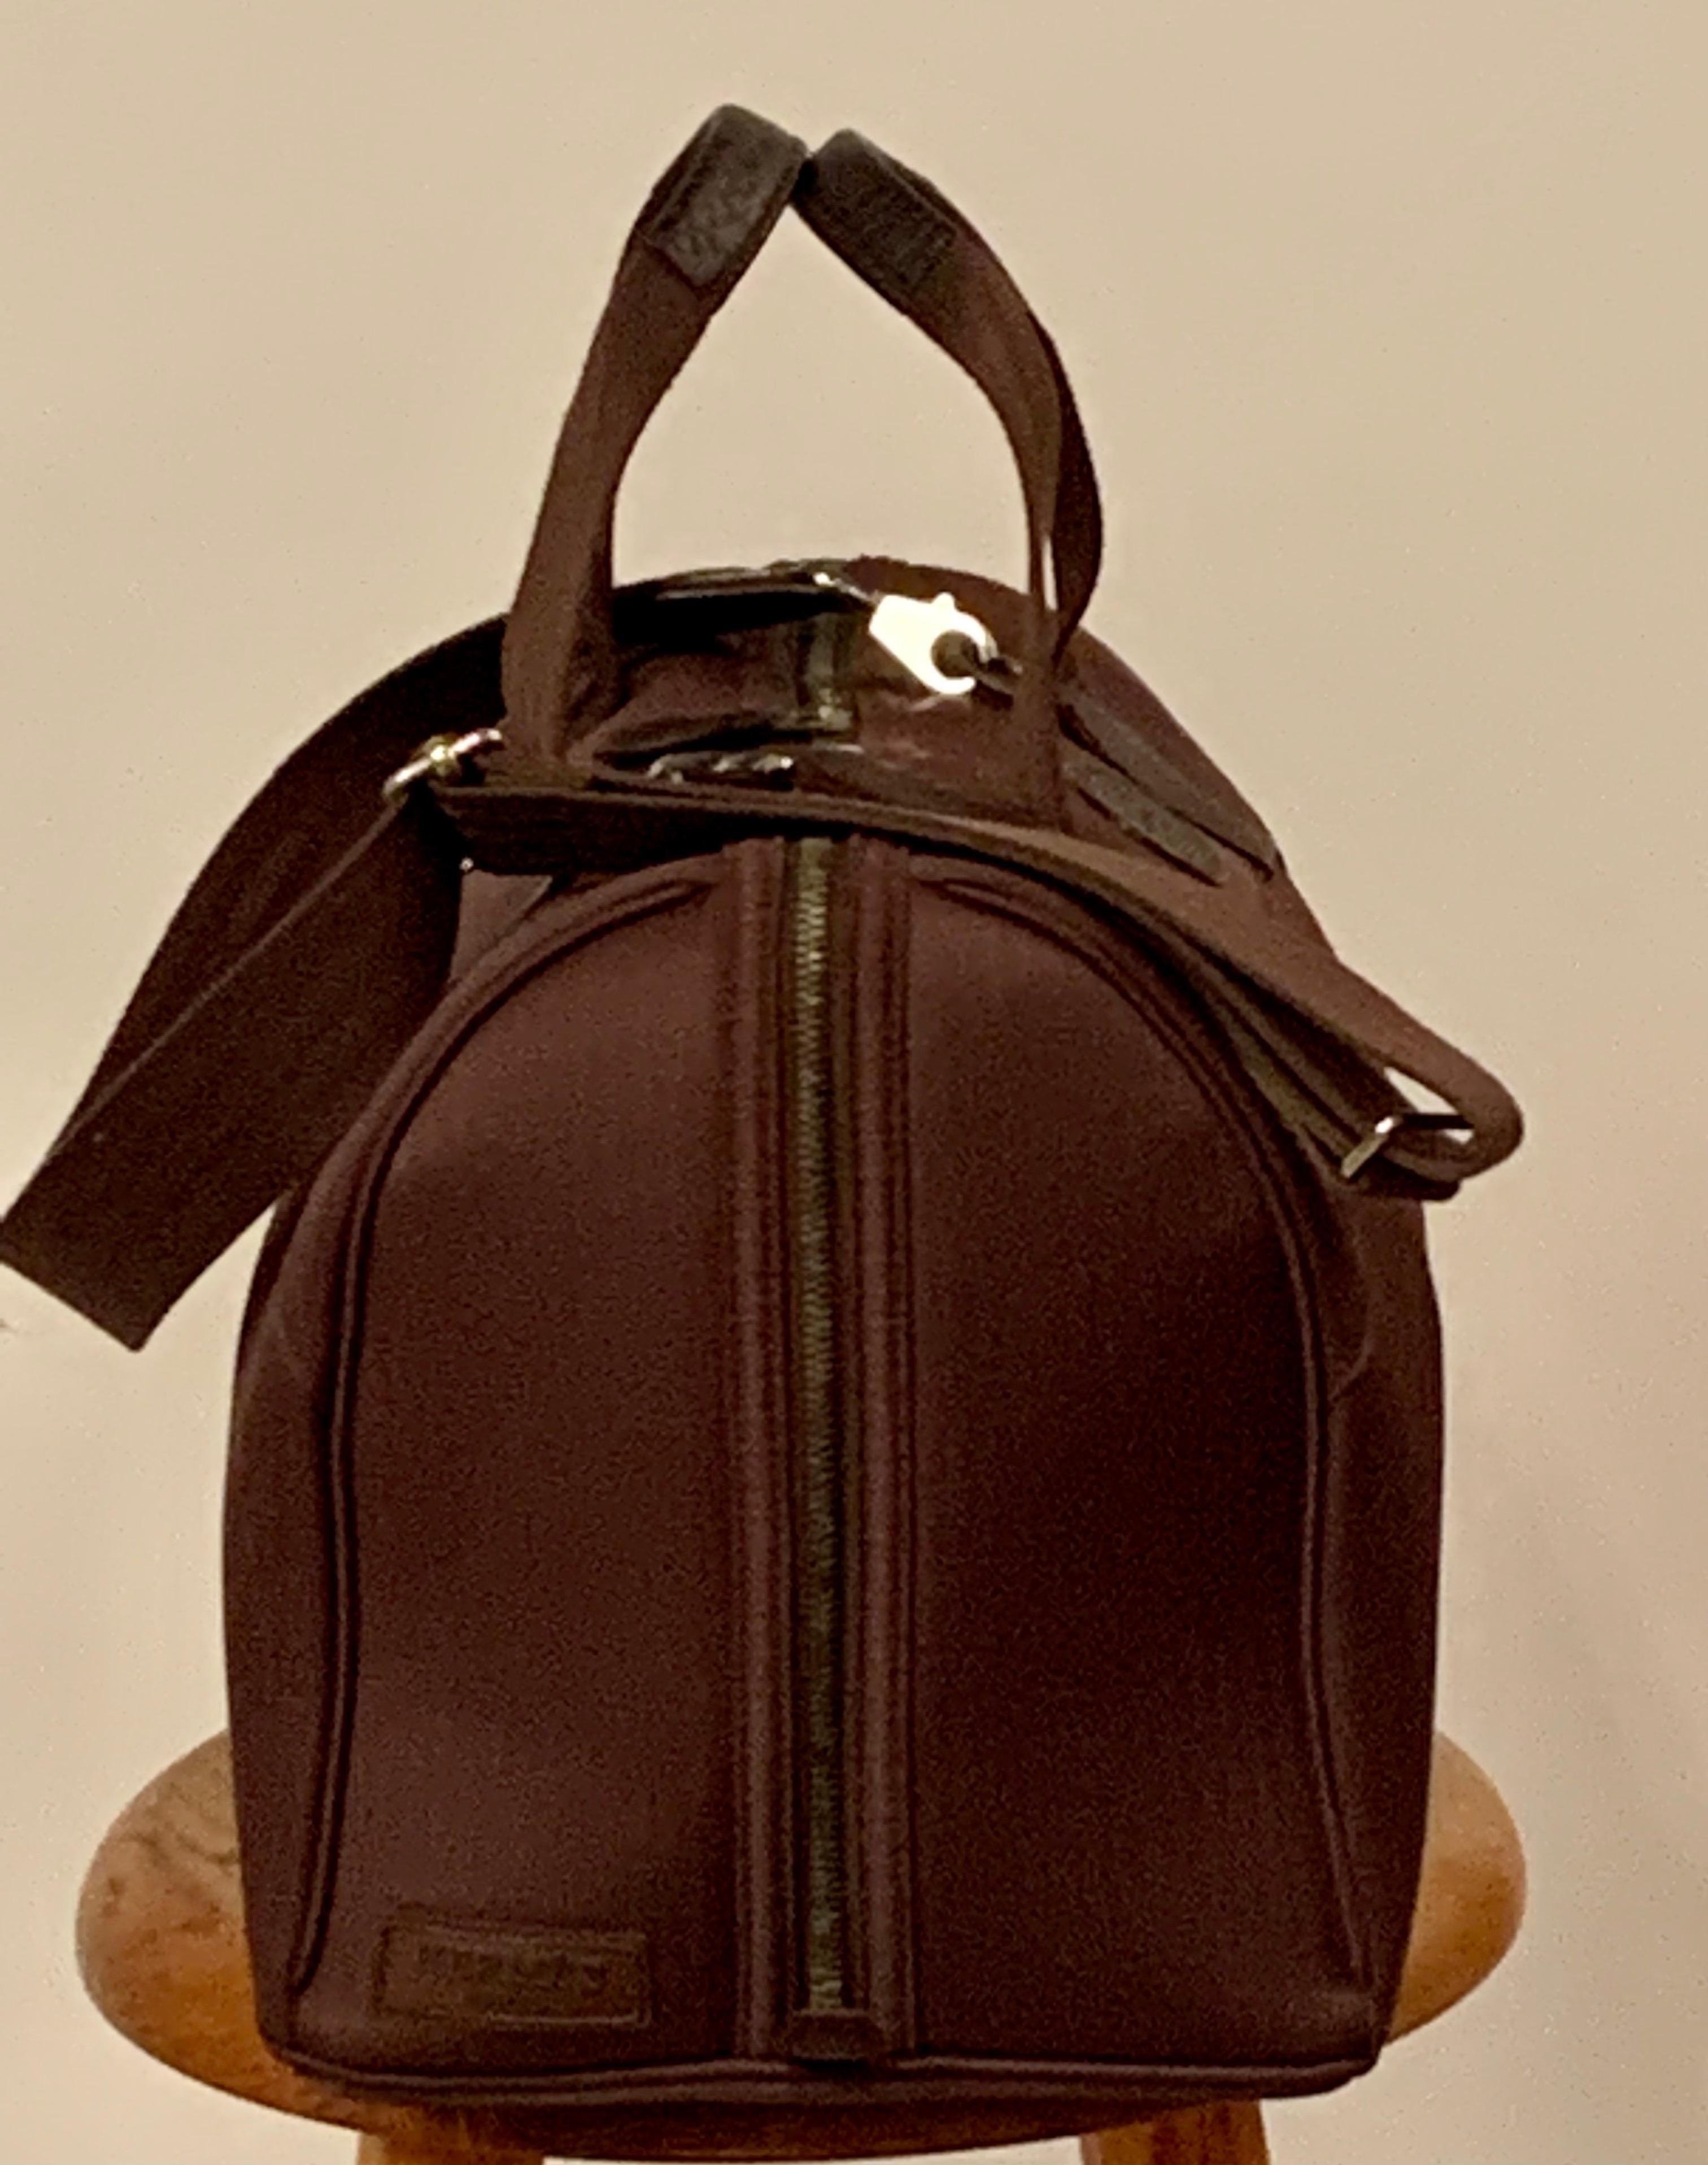 This Tou Tou pet carrier from Hermes is so luxurious, and every detail is so well thought out for the comfort of your pet.
The bag has leather accents and one end is all leather with round vents for fresh air and a view.  The bag has an adjustable